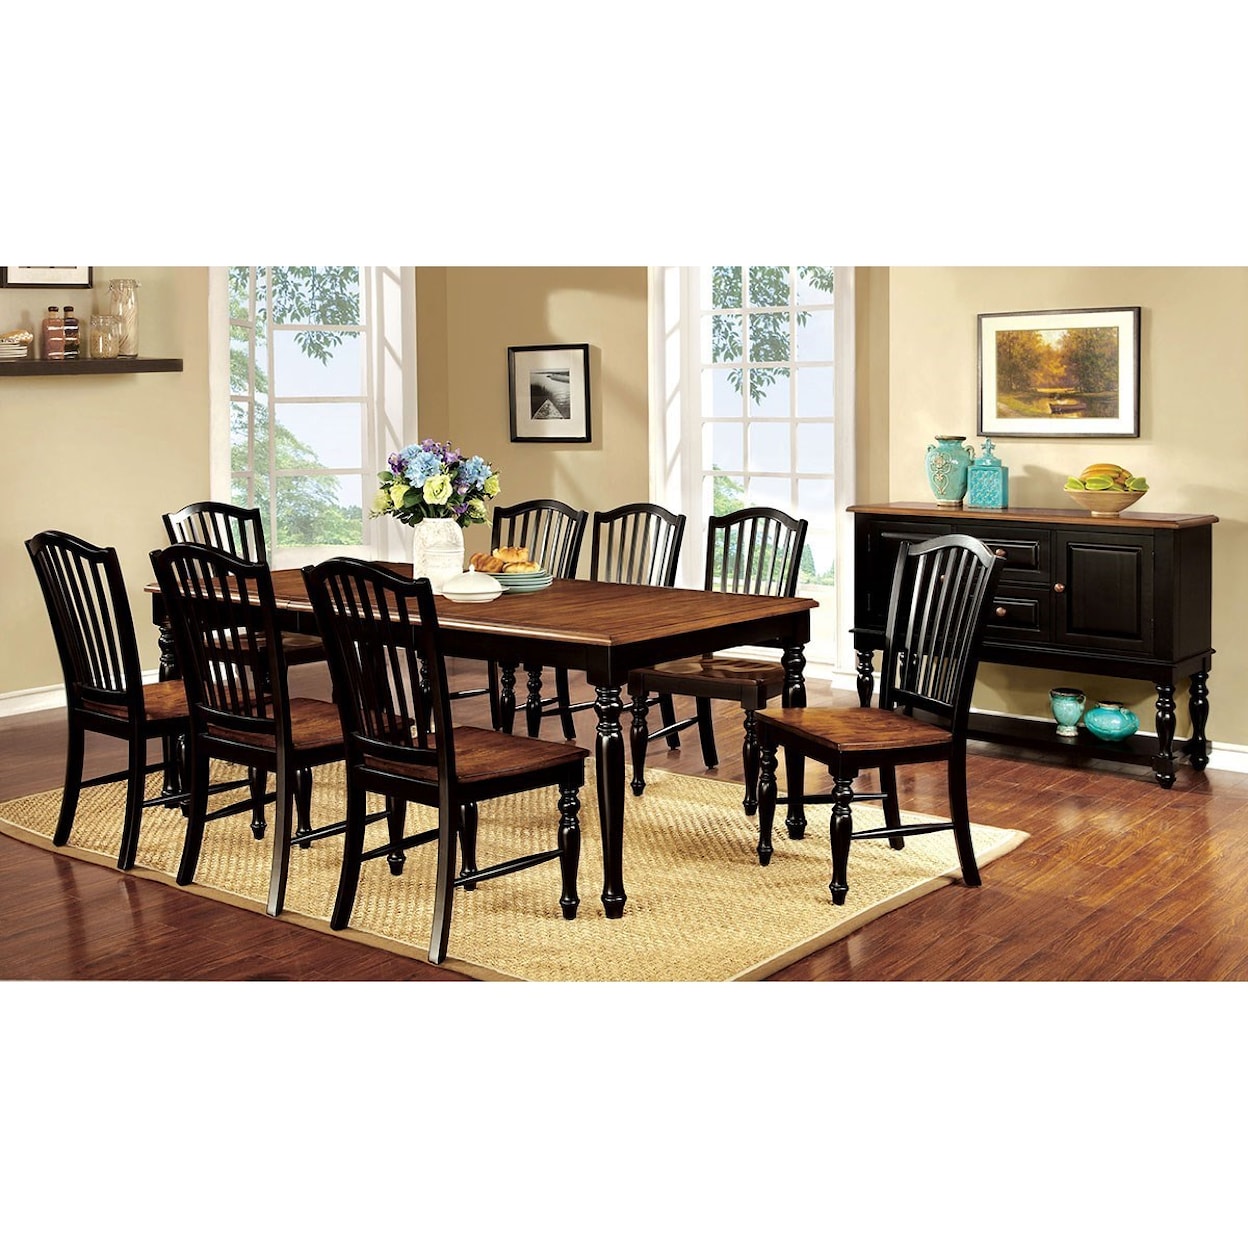 FUSA Mayville Table and 8 Chairs